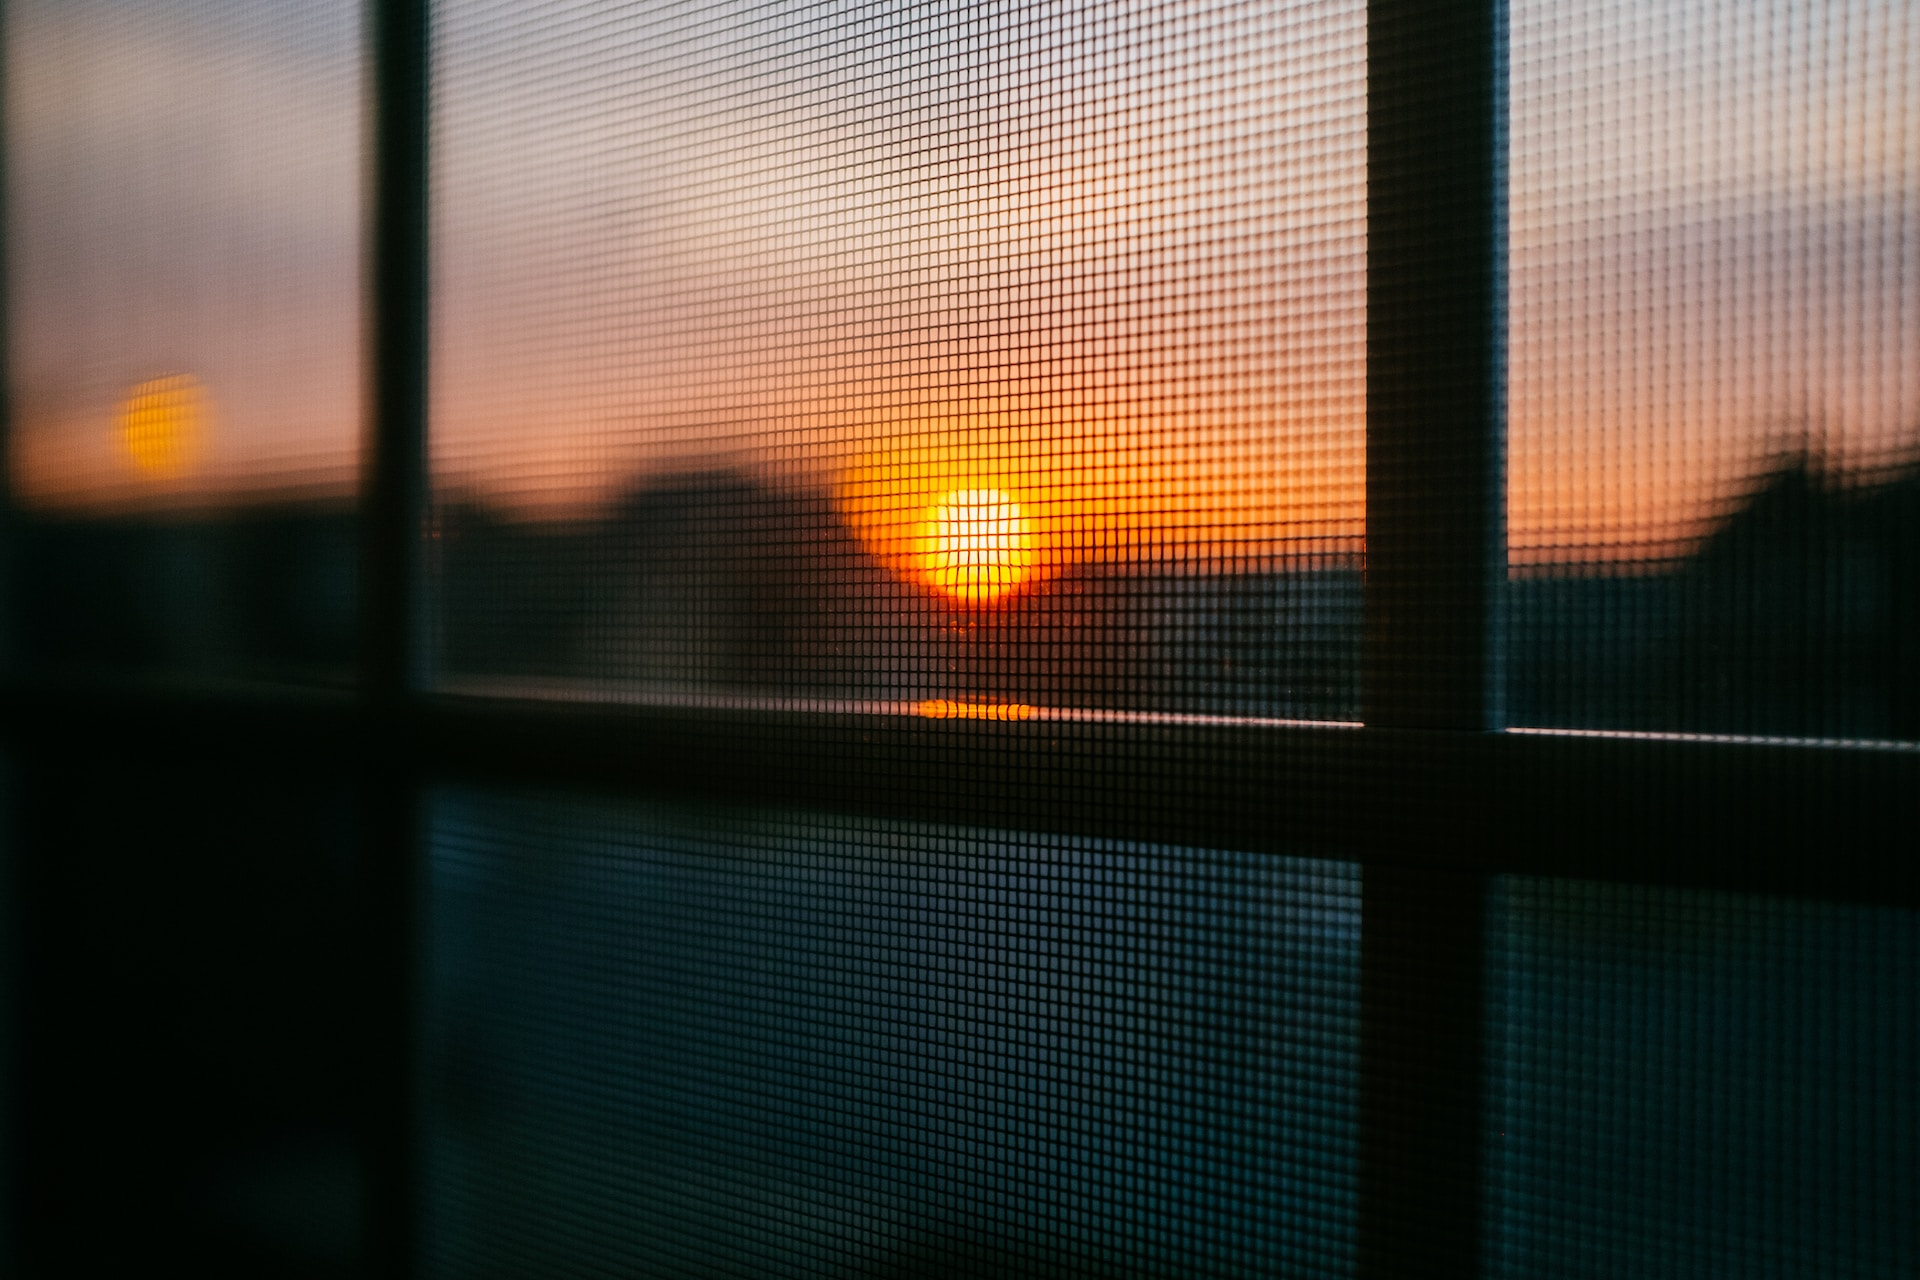 Sunrise as seen though a window with a screen